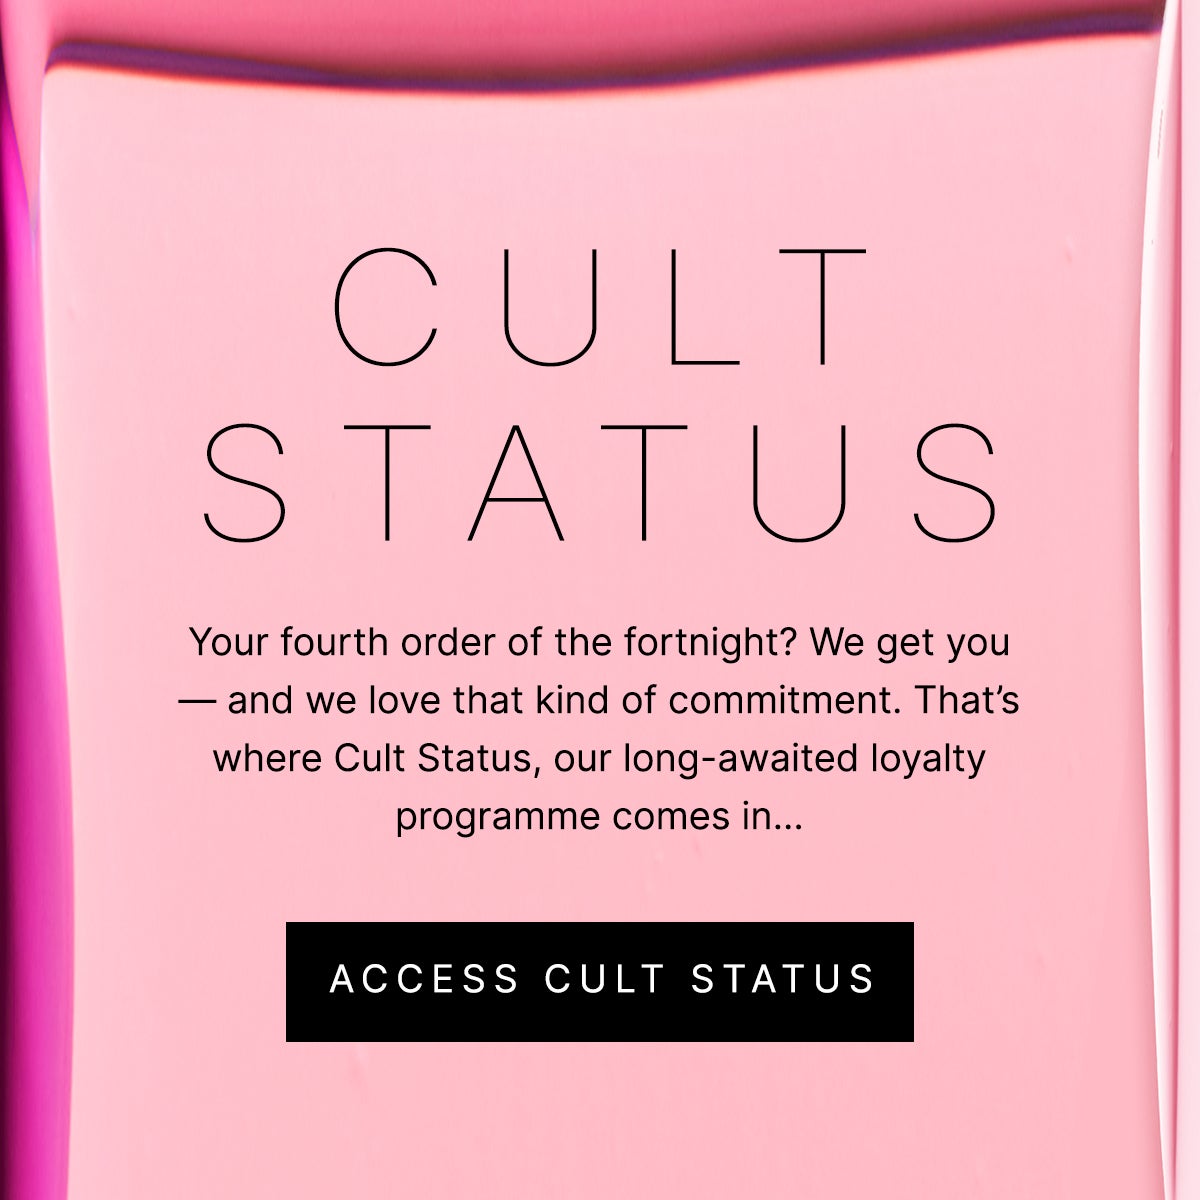 Cult Status: your fourth order of the fortnight? We get you - and we love that kind of commitment. That's where Cult Status, our long-awaited loyalty programme comes in...